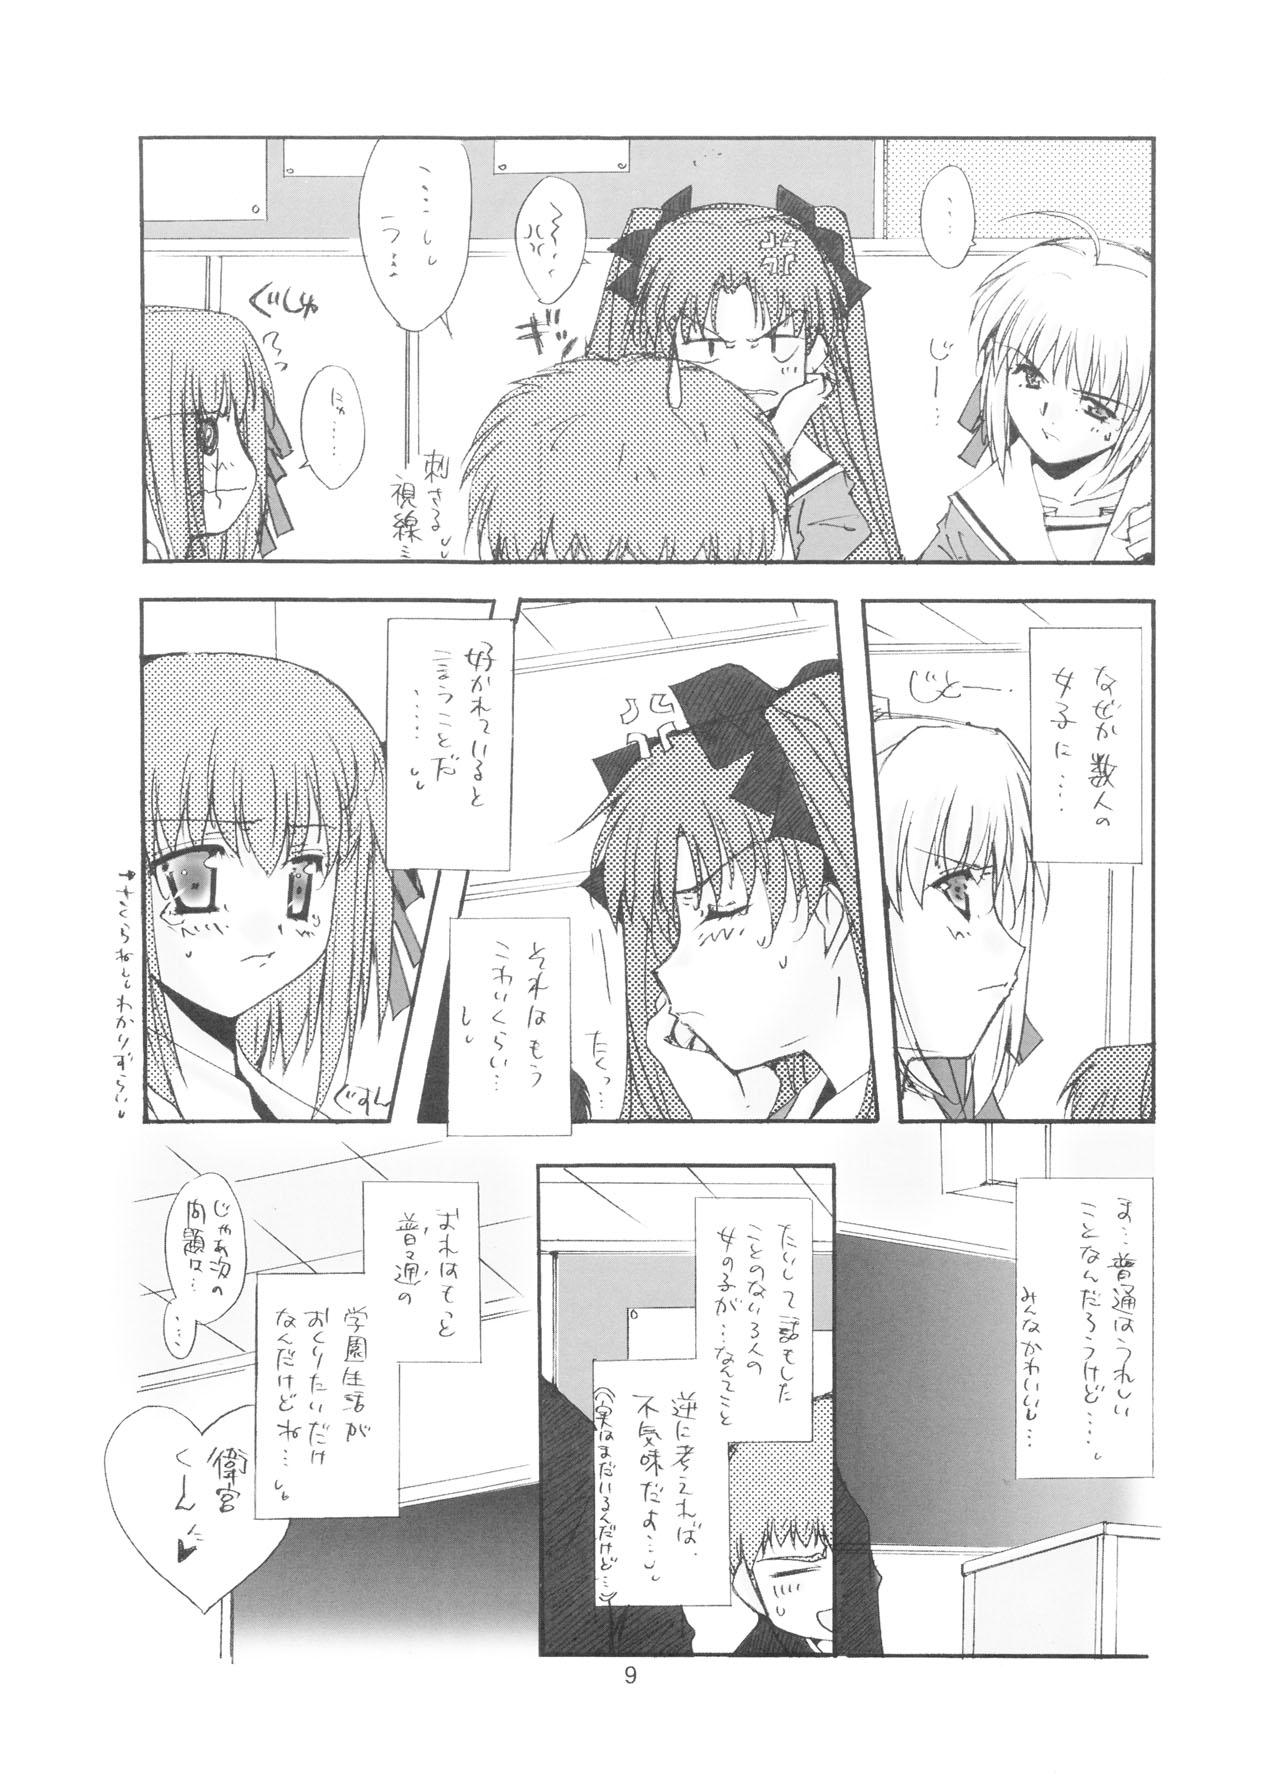 Sloppy Blowjob PURPLE DIGNITY - Fate stay night Amateurs - Page 6